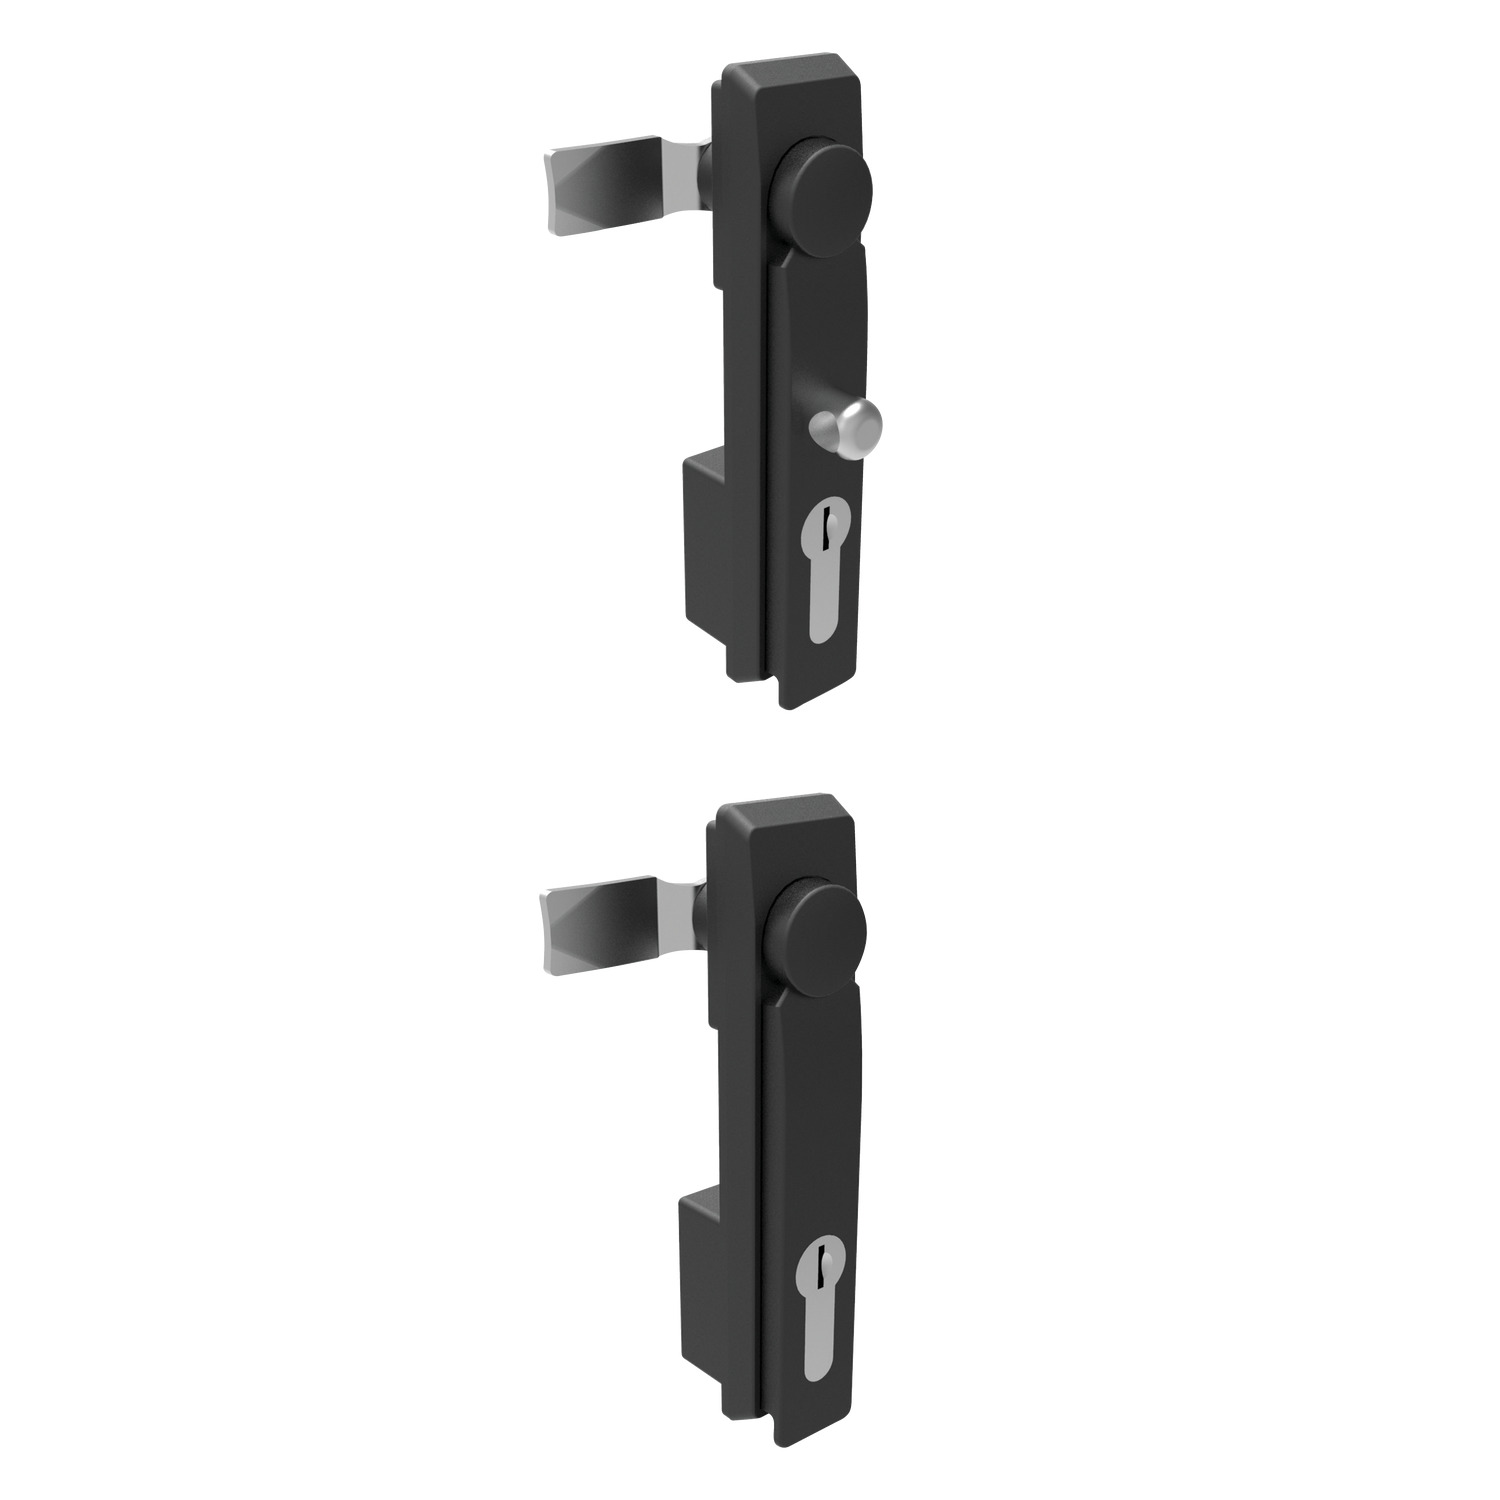 B1088.AW0020 Swing Handles with padlock device. with dust cover. Body Polyamide, Handle Die Cast, black finish. 40 Euro Lock.